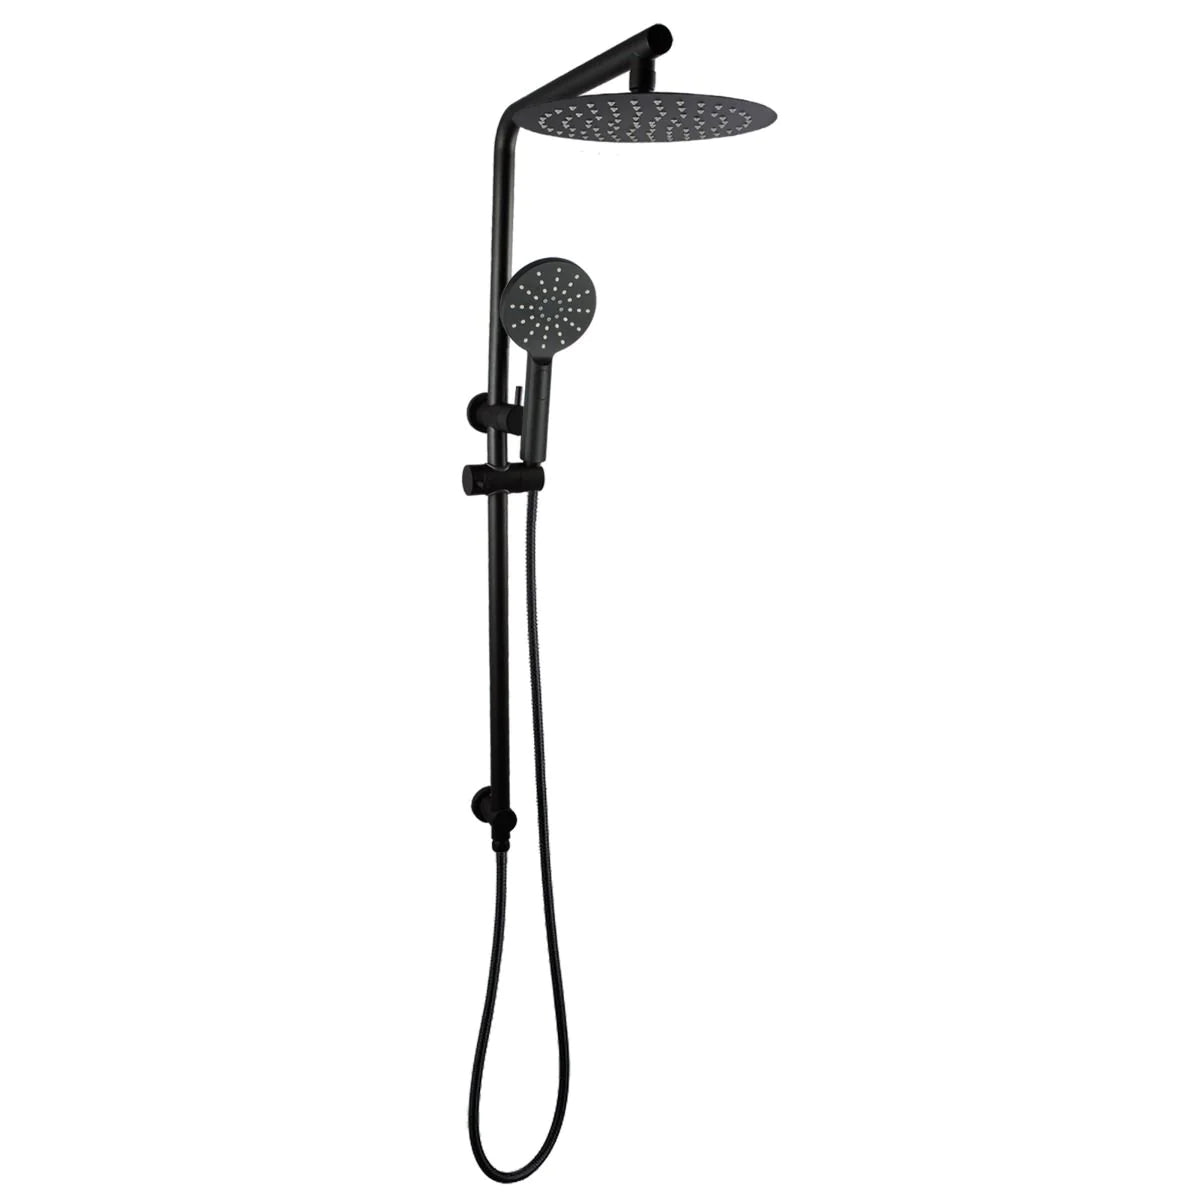 10" Right Angle Round Shower Station:Top Inlet, Modern Design-Black-OX2128-A-SH-N+OX0007-SH+OX-R11-HHS